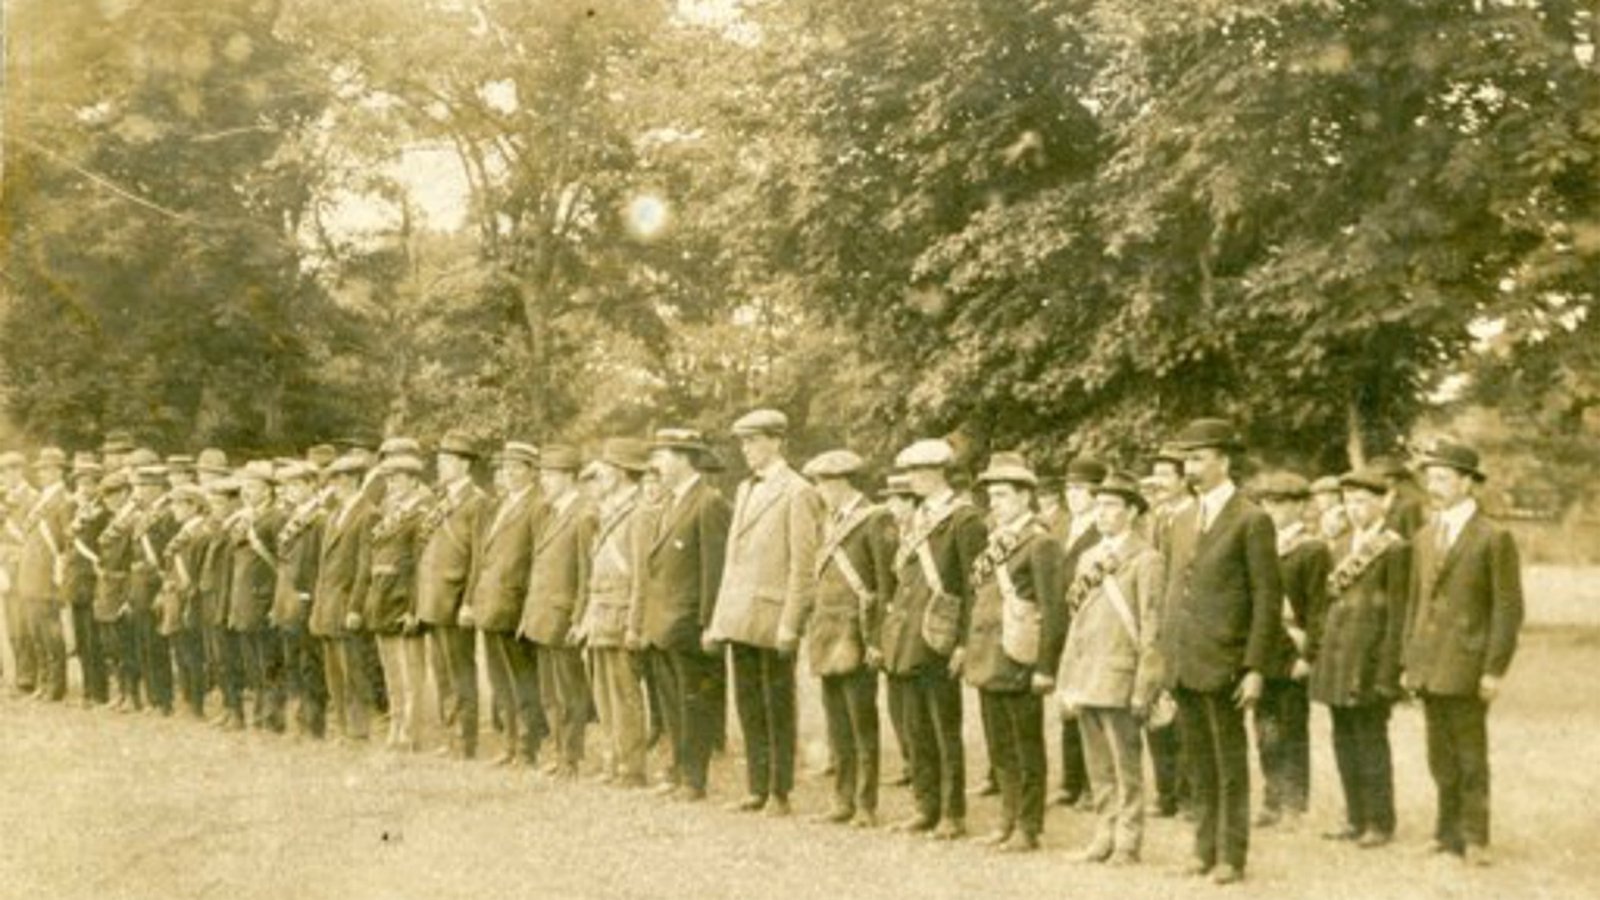 Image - The Irish Volunteers would produce several Sinn Féin candidates in the 1918 election